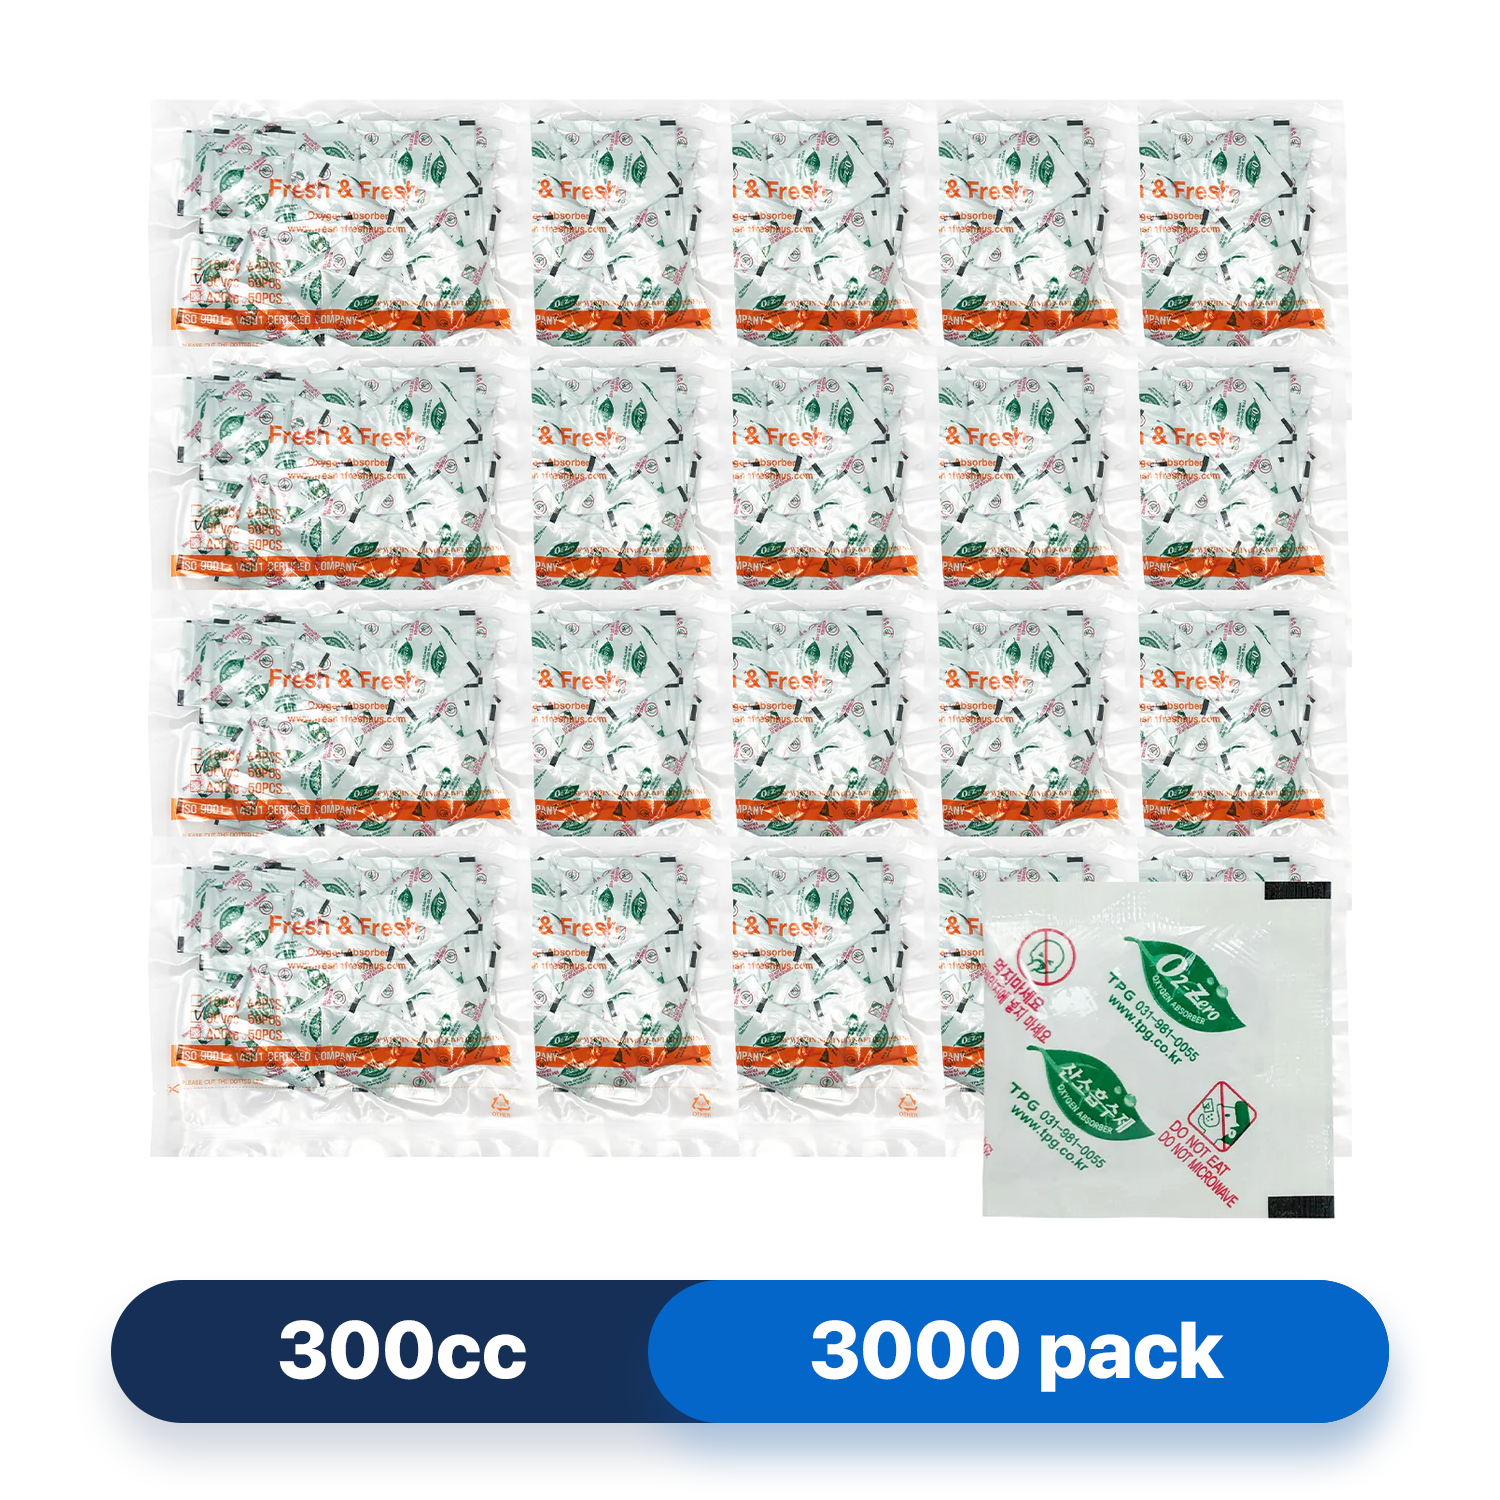 Fresh & Fresh (2500 Packs) 300 CC Premium Oxygen Absorbers(50 Bag of 50 Packets) - ISO 9001 & 14001 Certified Facility Manufactured